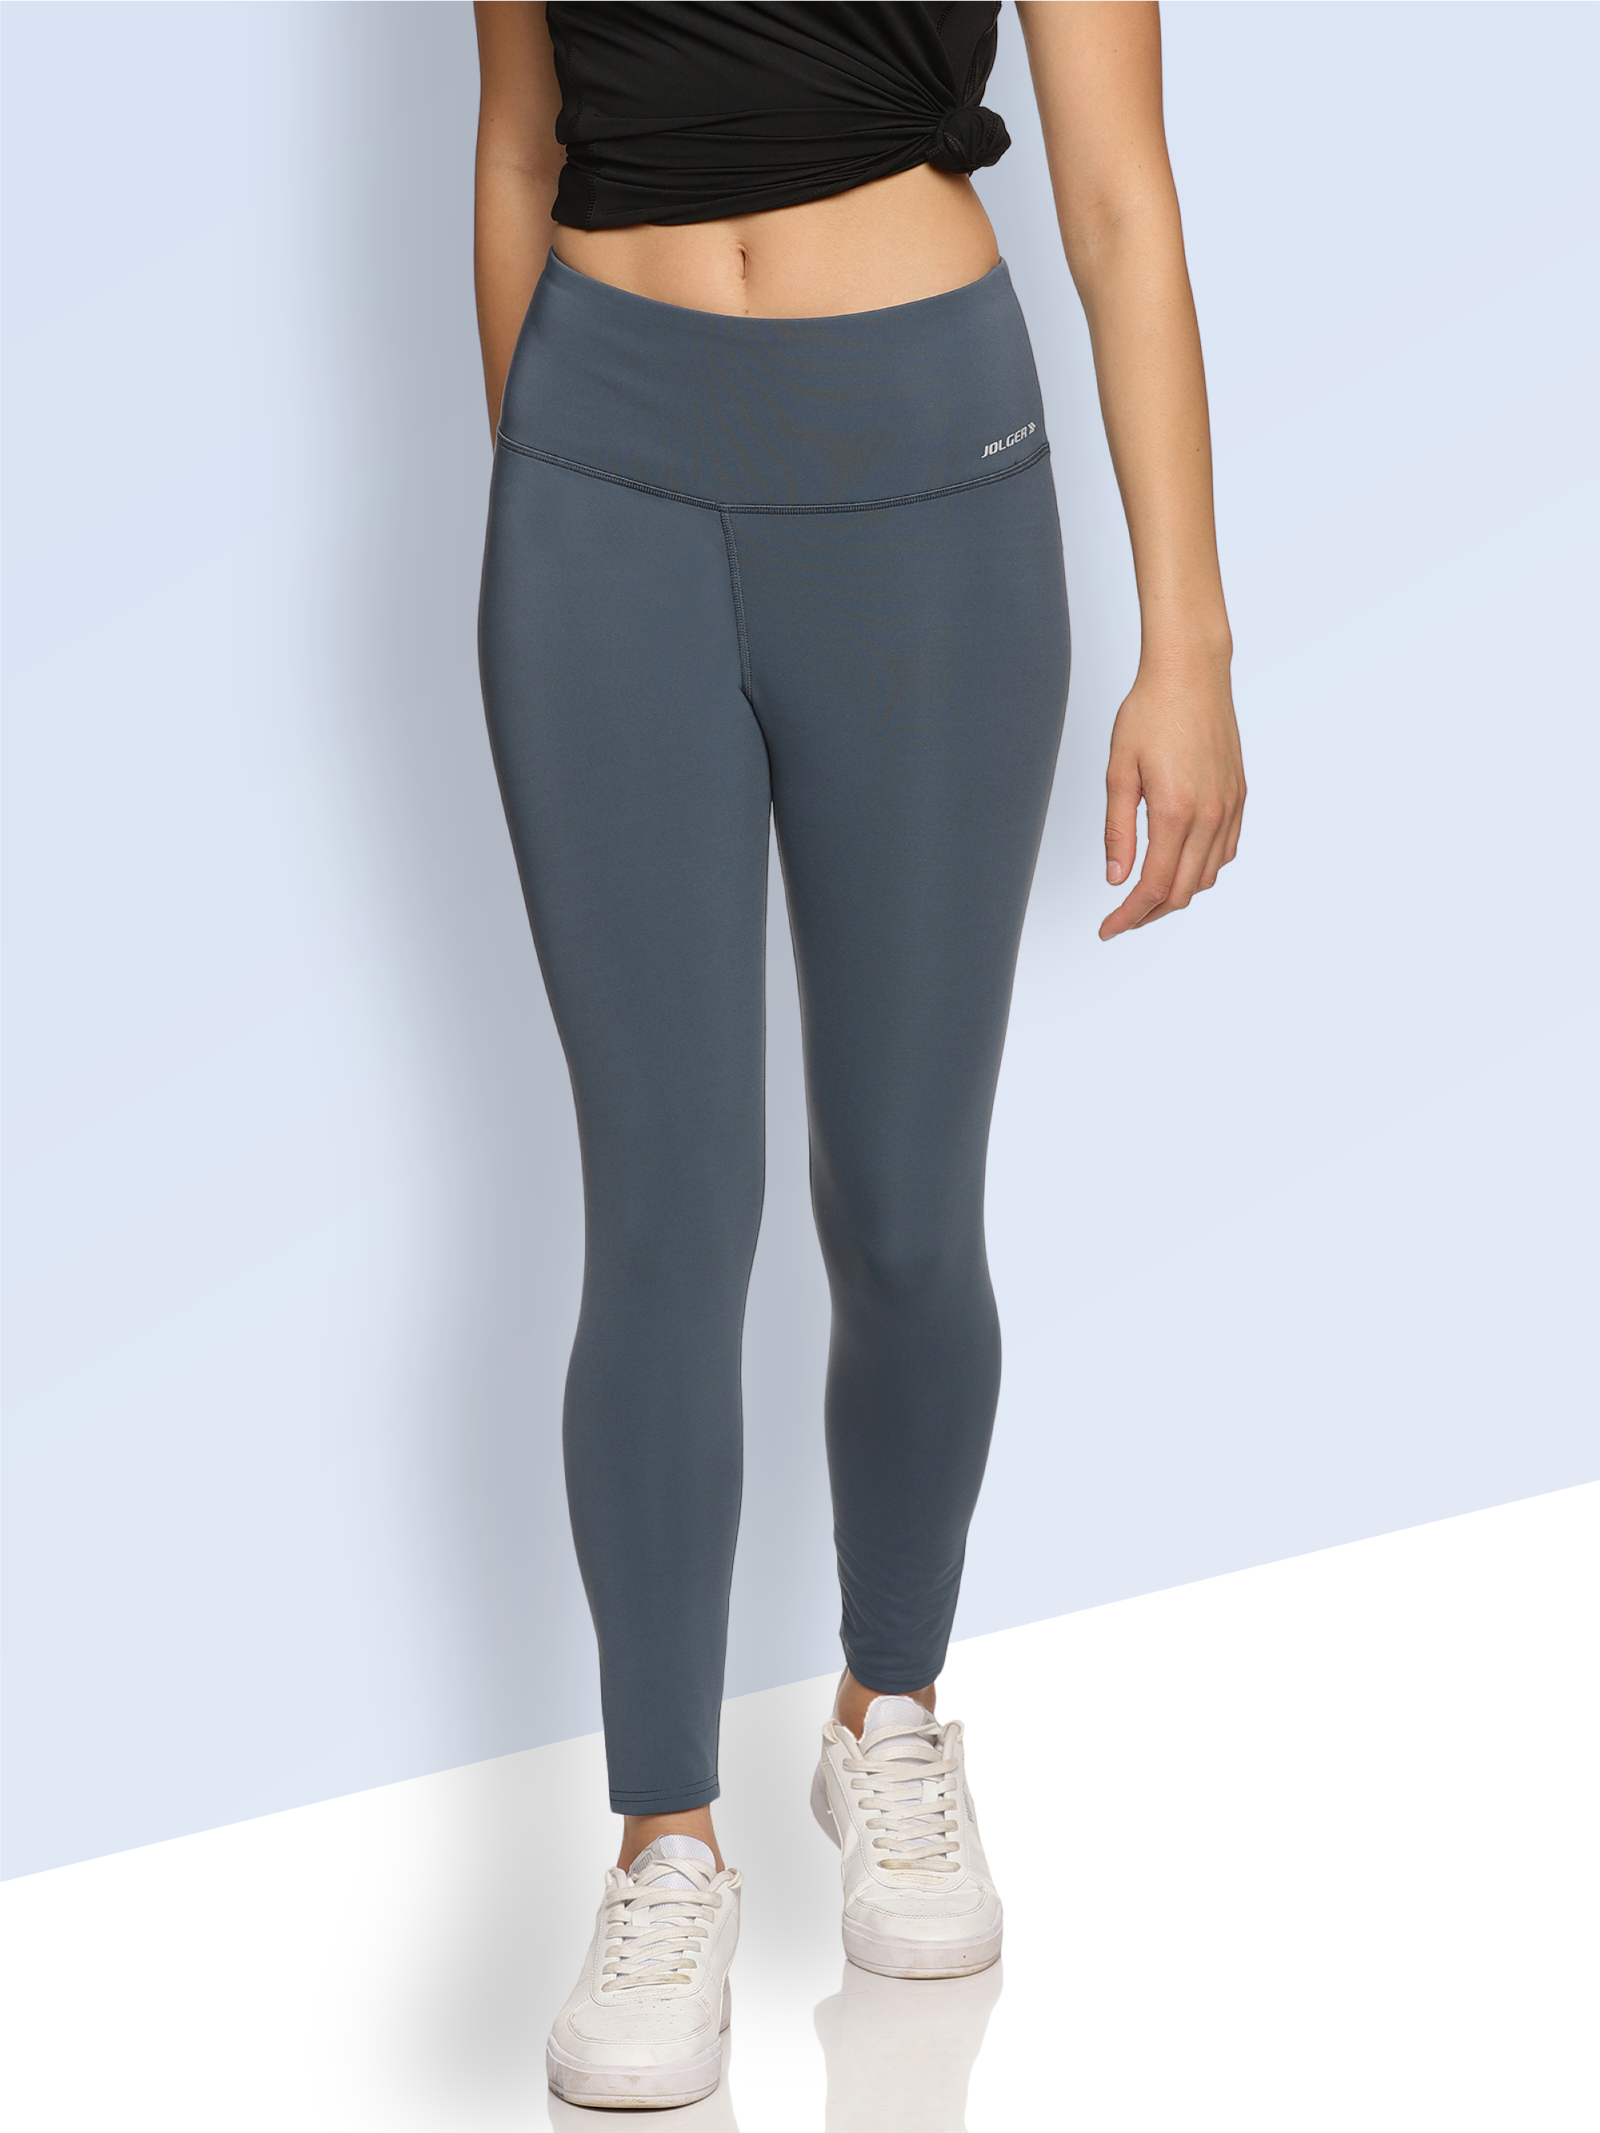 Women's High Waist Tights For Gym